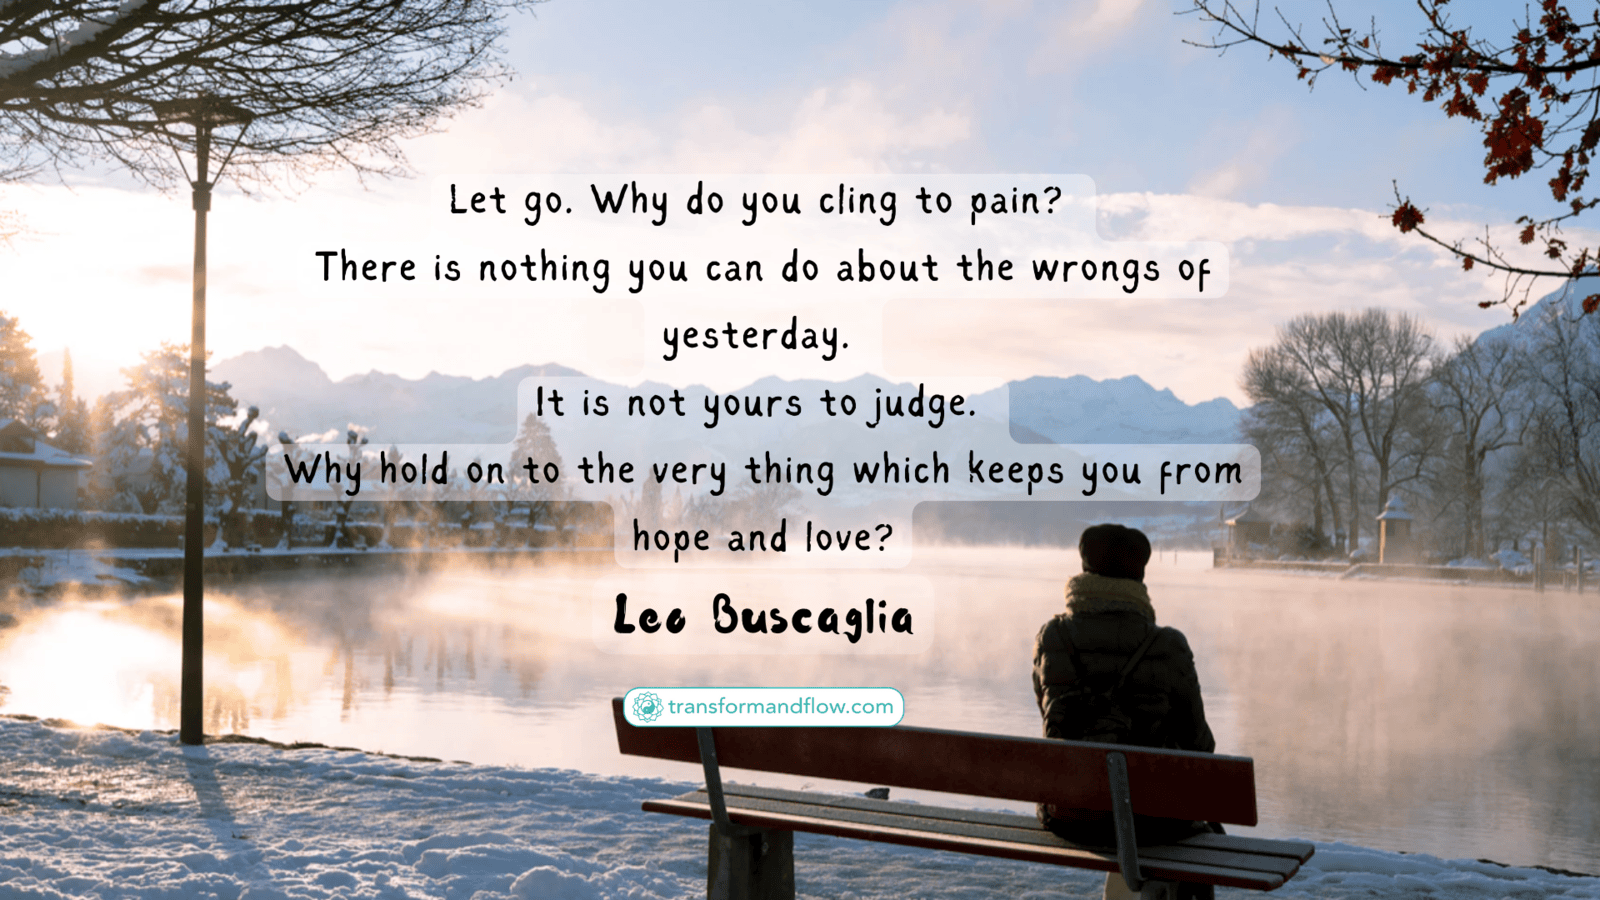 Let go. Why do you cling to pain? There is nothing you can do about the wrongs of yesterday. It is not yours to judge. Why hold on to the very thing which keeps you from hope and love? Lee Buscaglia